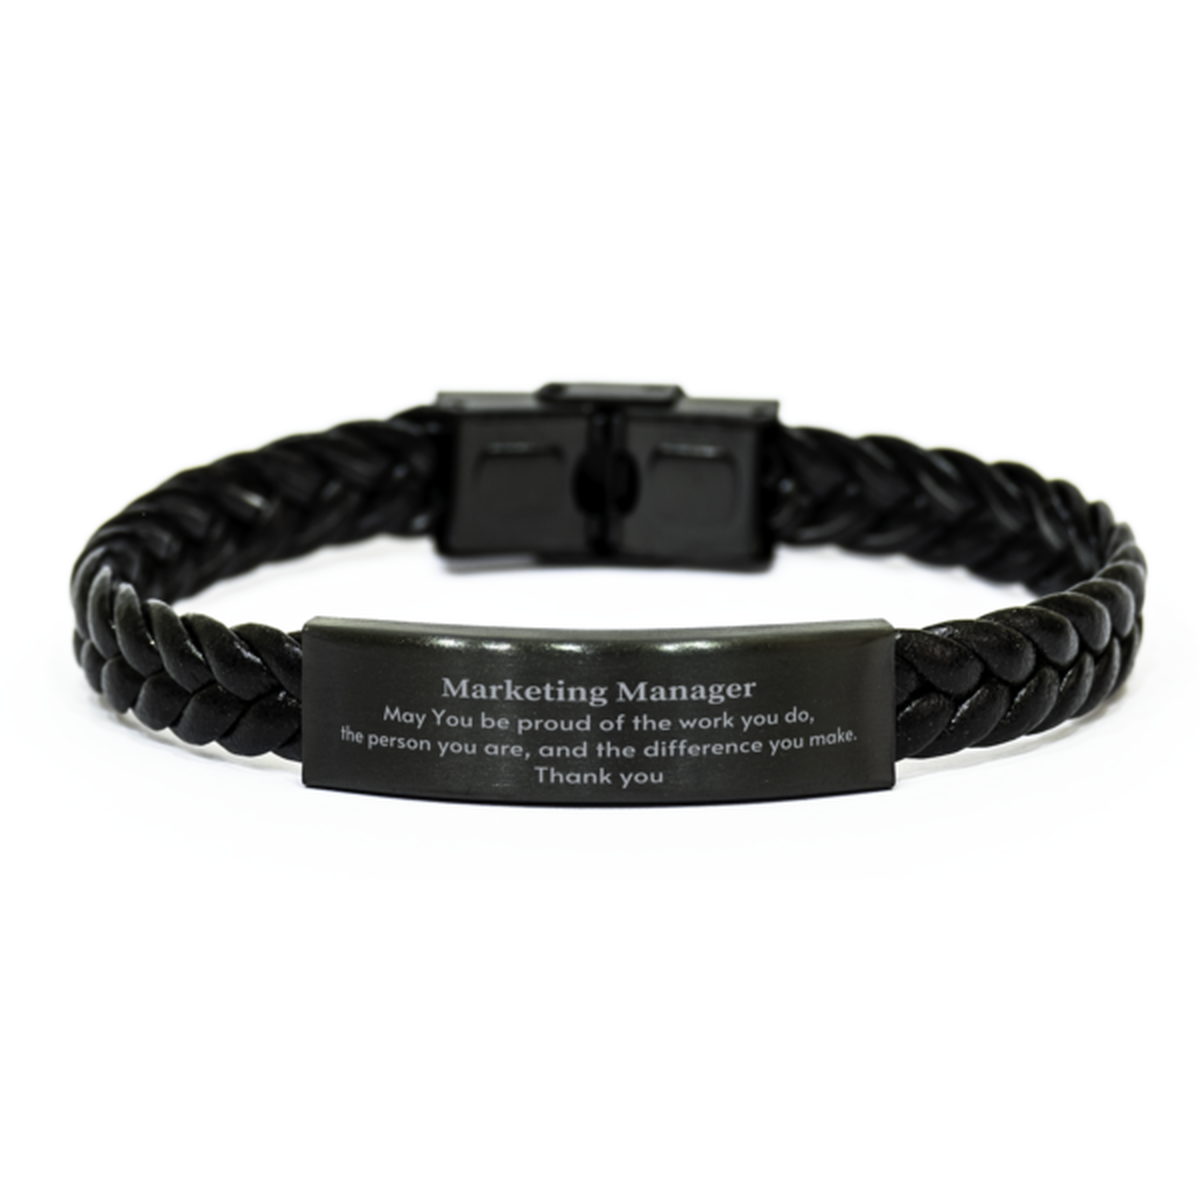 Heartwarming Braided Leather Bracelet Retirement Coworkers Gifts for Marketing Manager, Marketing Manager May You be proud of the work you do, the person you are Gifts for Boss Men Women Friends